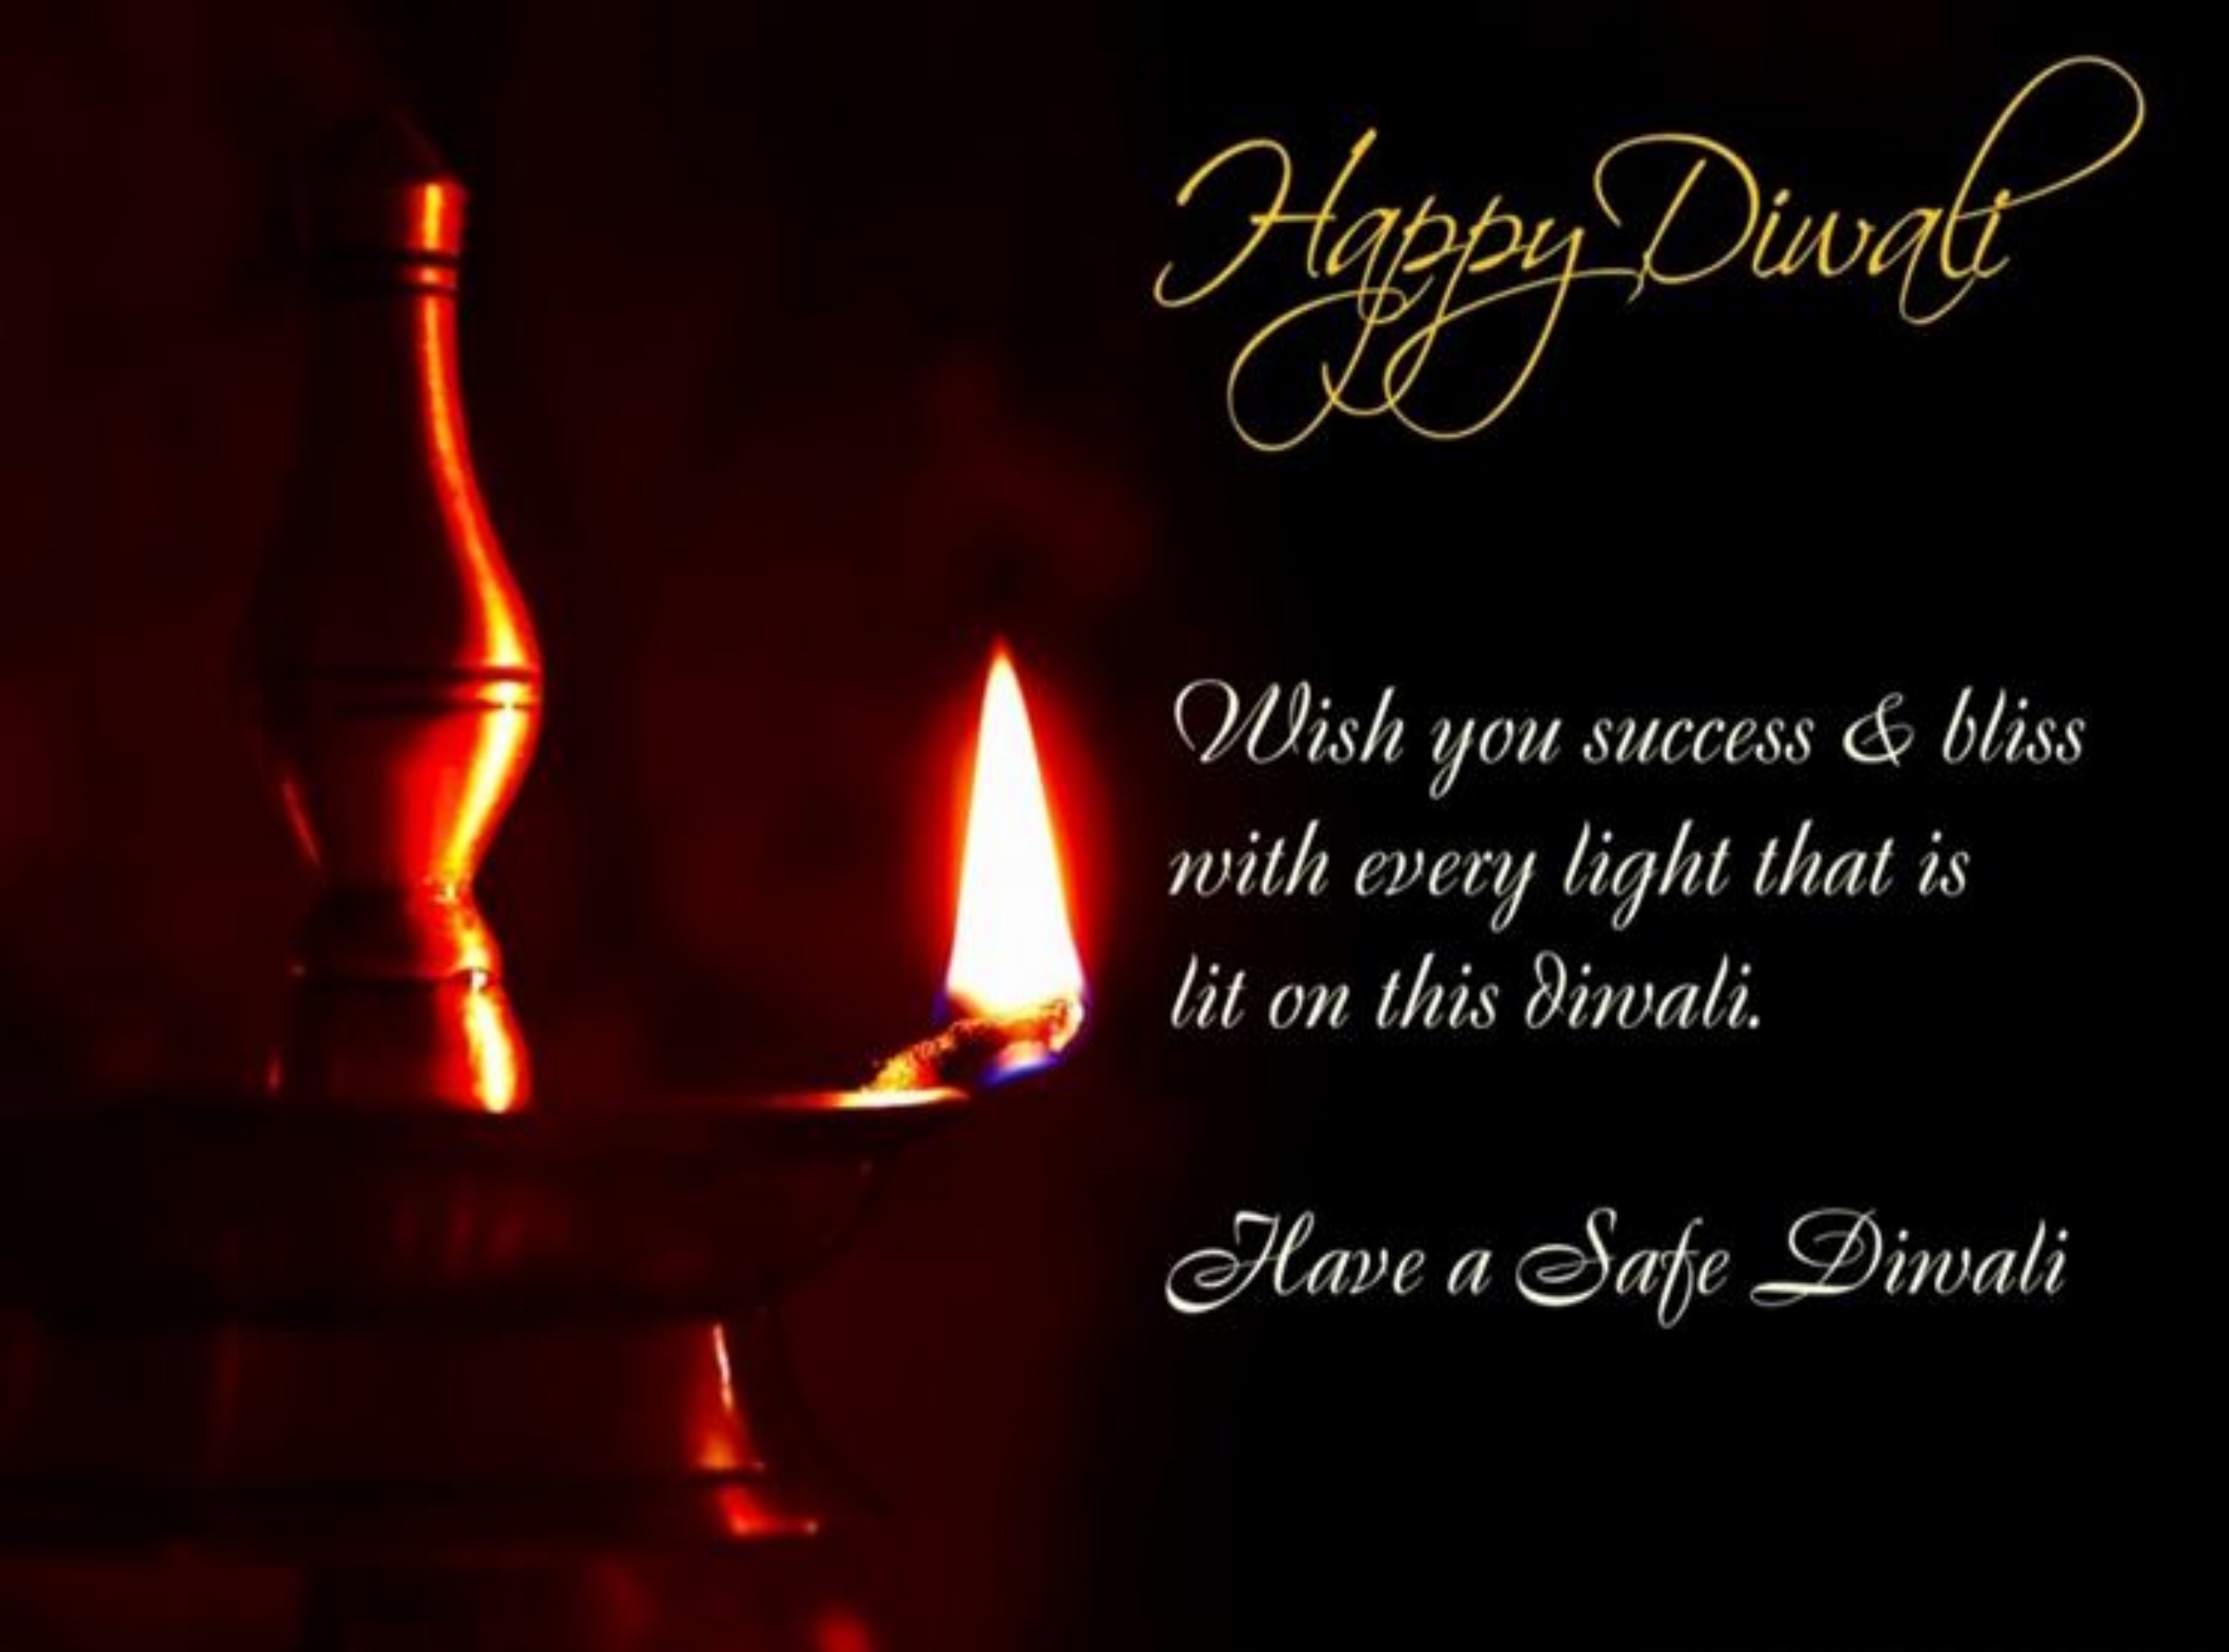 happy diwali wish you success & bliss with every light that is lit on this diwali